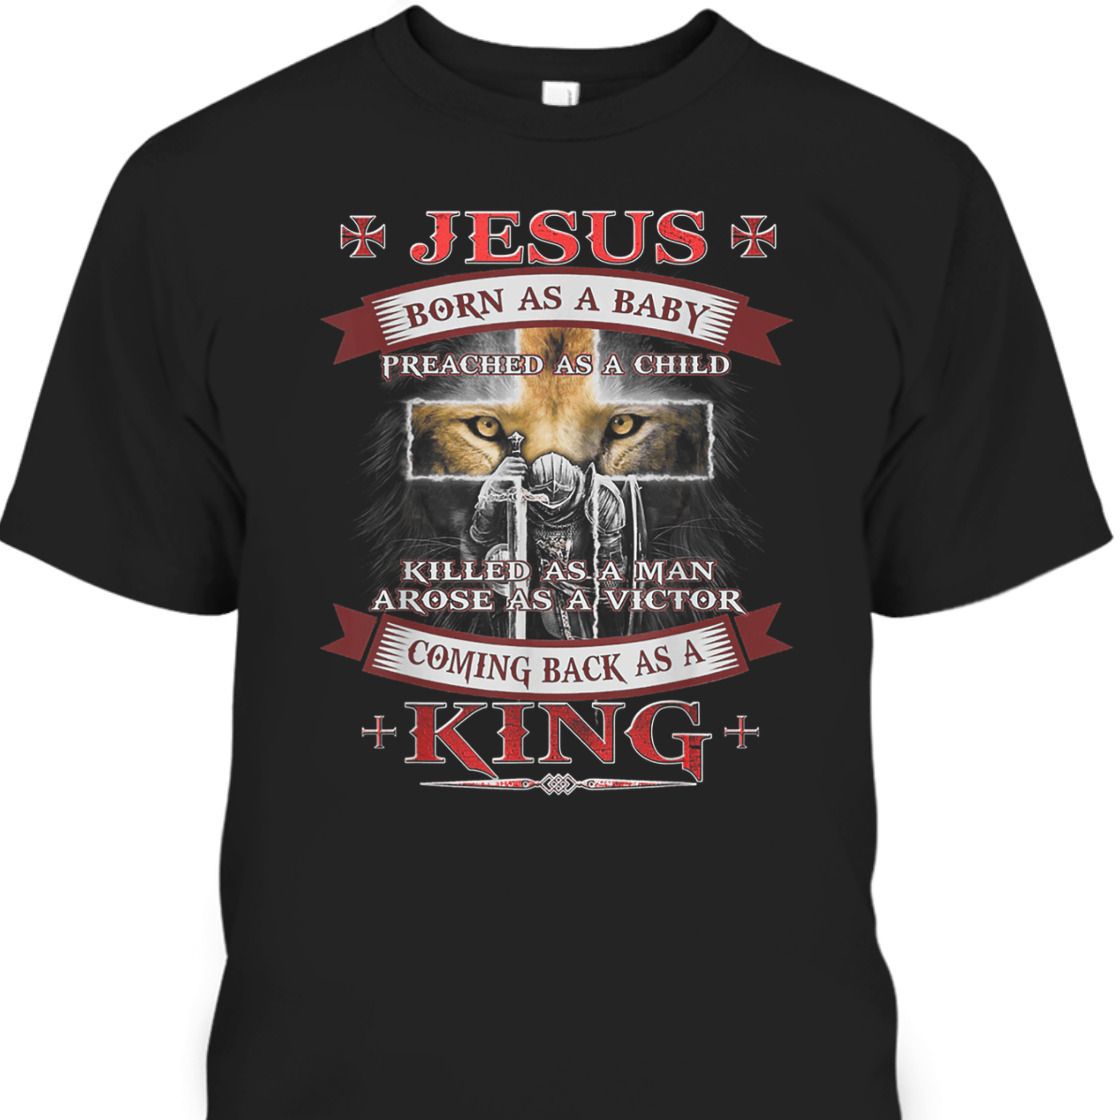 Armor Of God T-Shirt Jesus Born As A Baby Preached As A Child Coming Back As A King